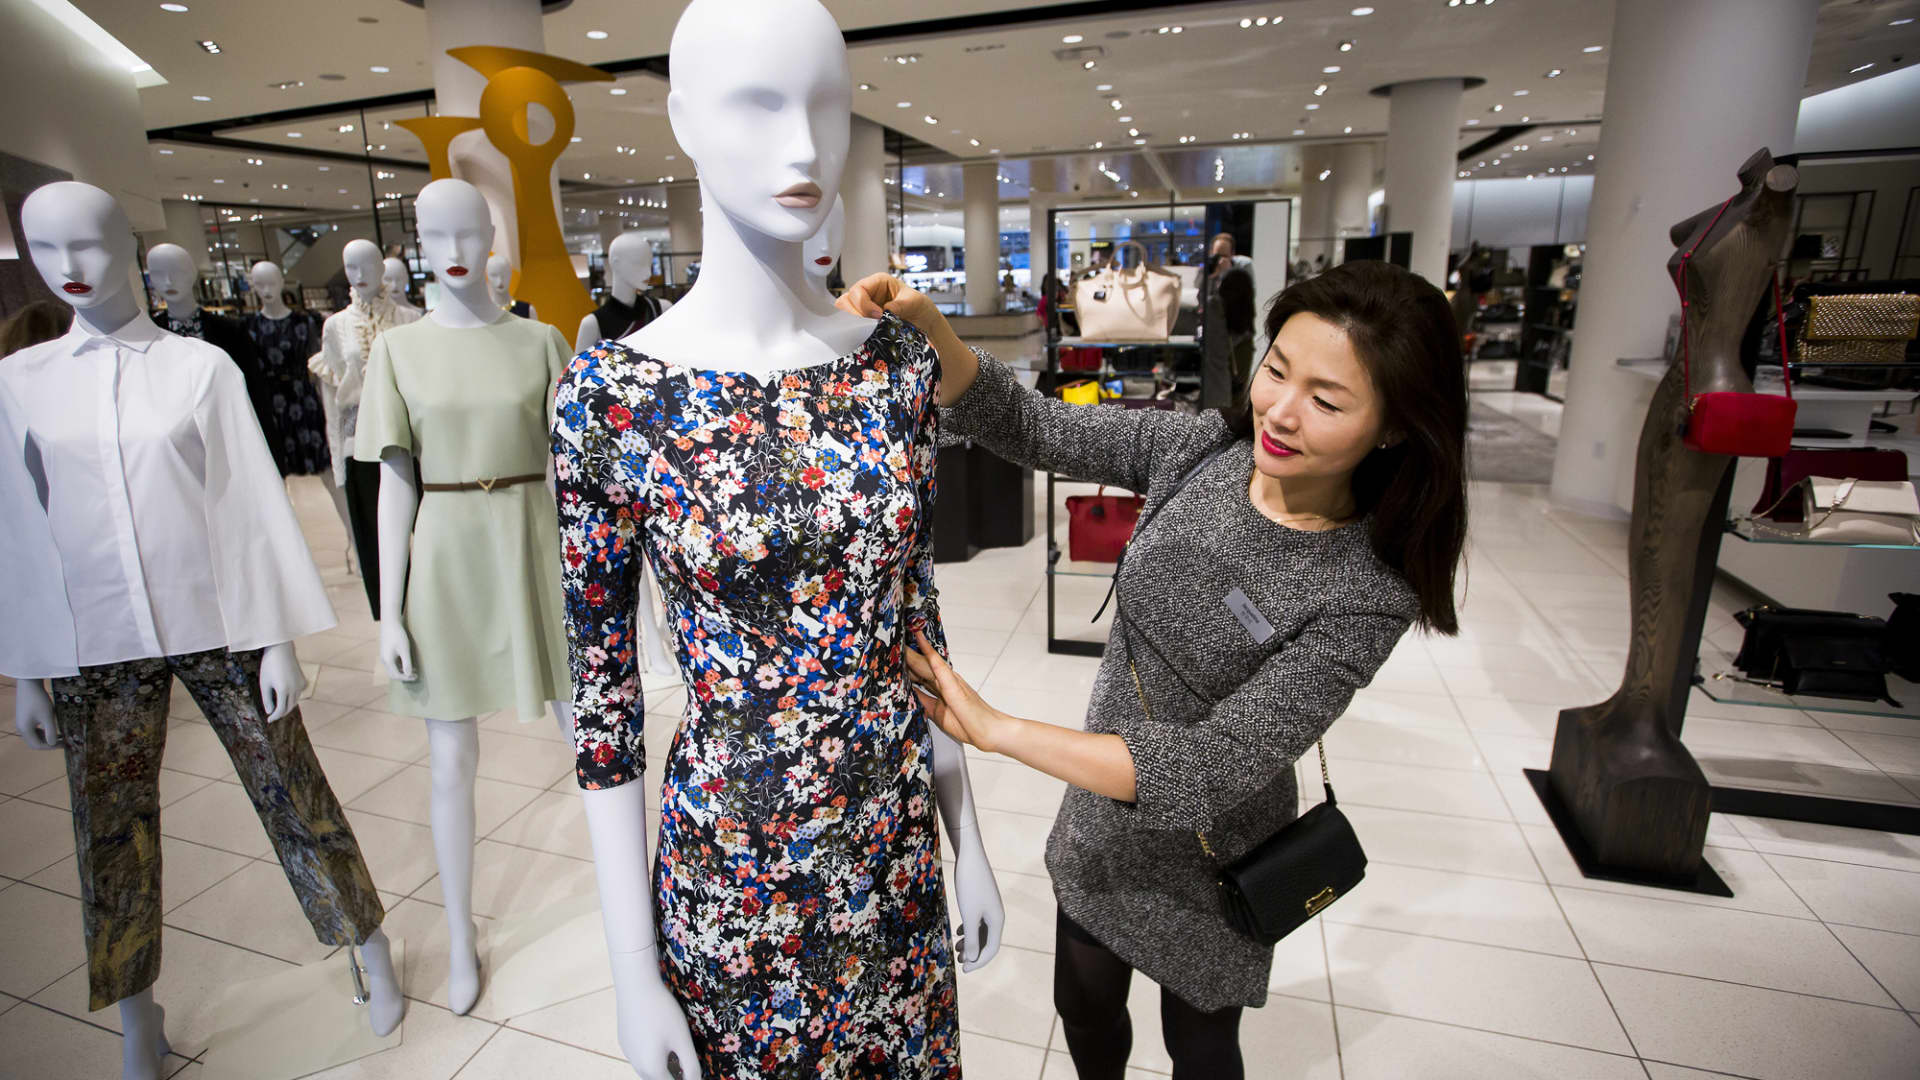 Colorful suits and bold makeup: As people splurge on dressing up again, retailers like Macy’s and Ulta are benefiting